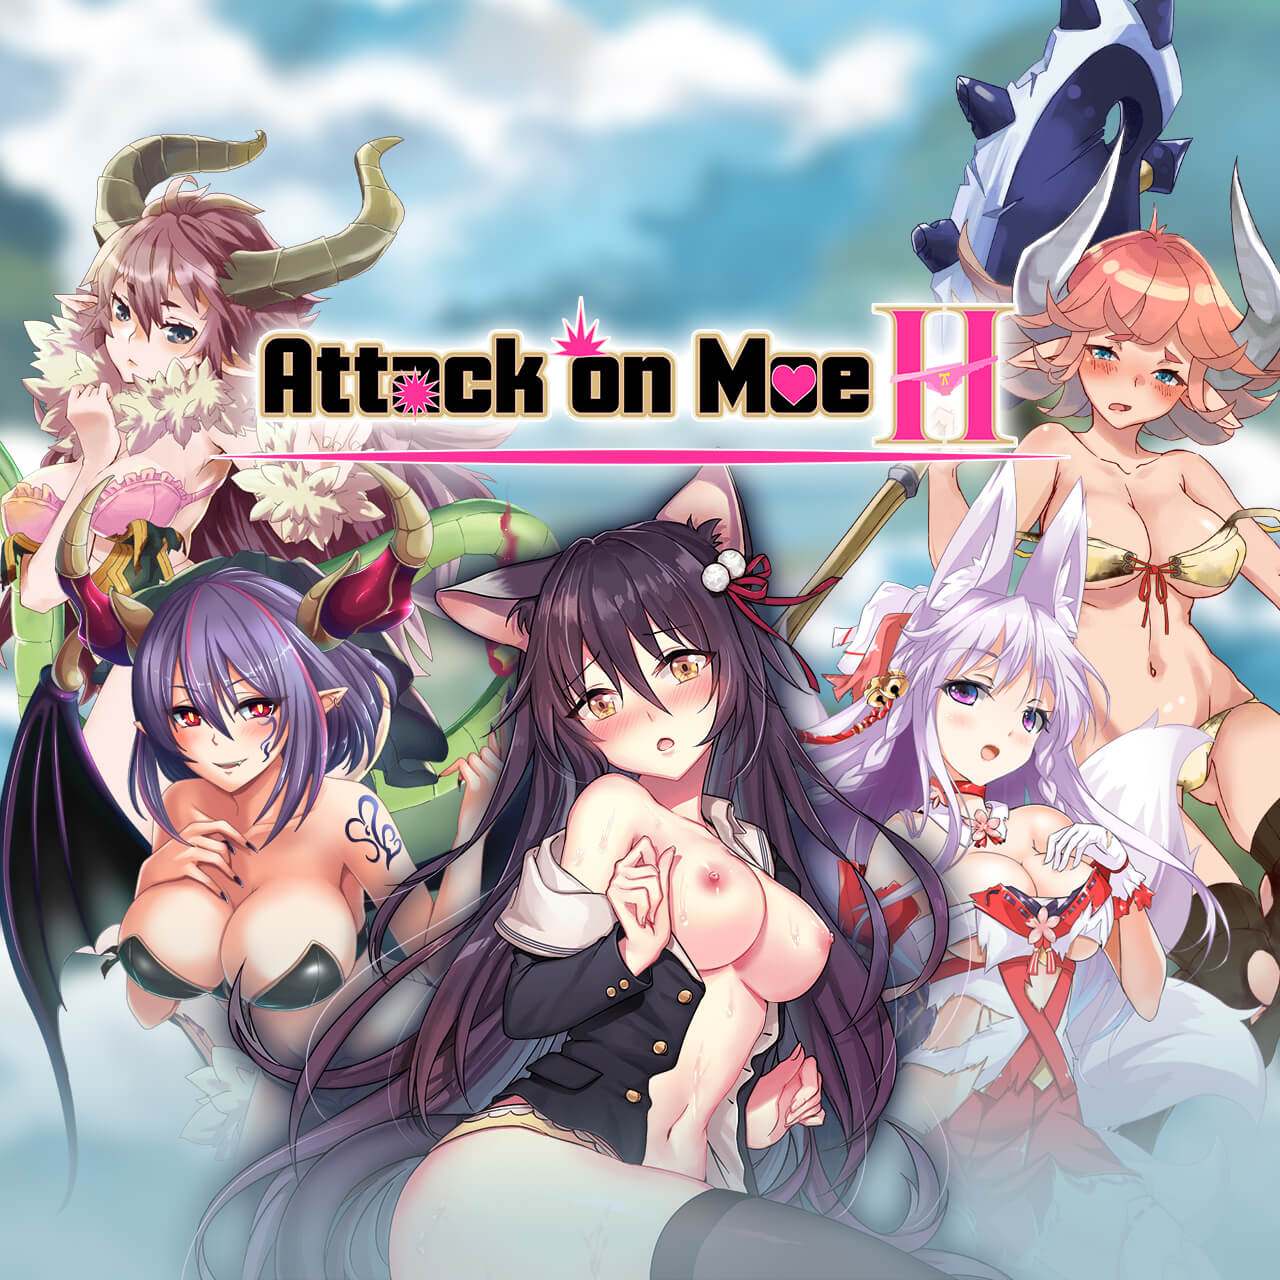 Hot King Of The Hill Hentai - Attack On Moe H - Clicker Sex Game with APK file | Nutaku